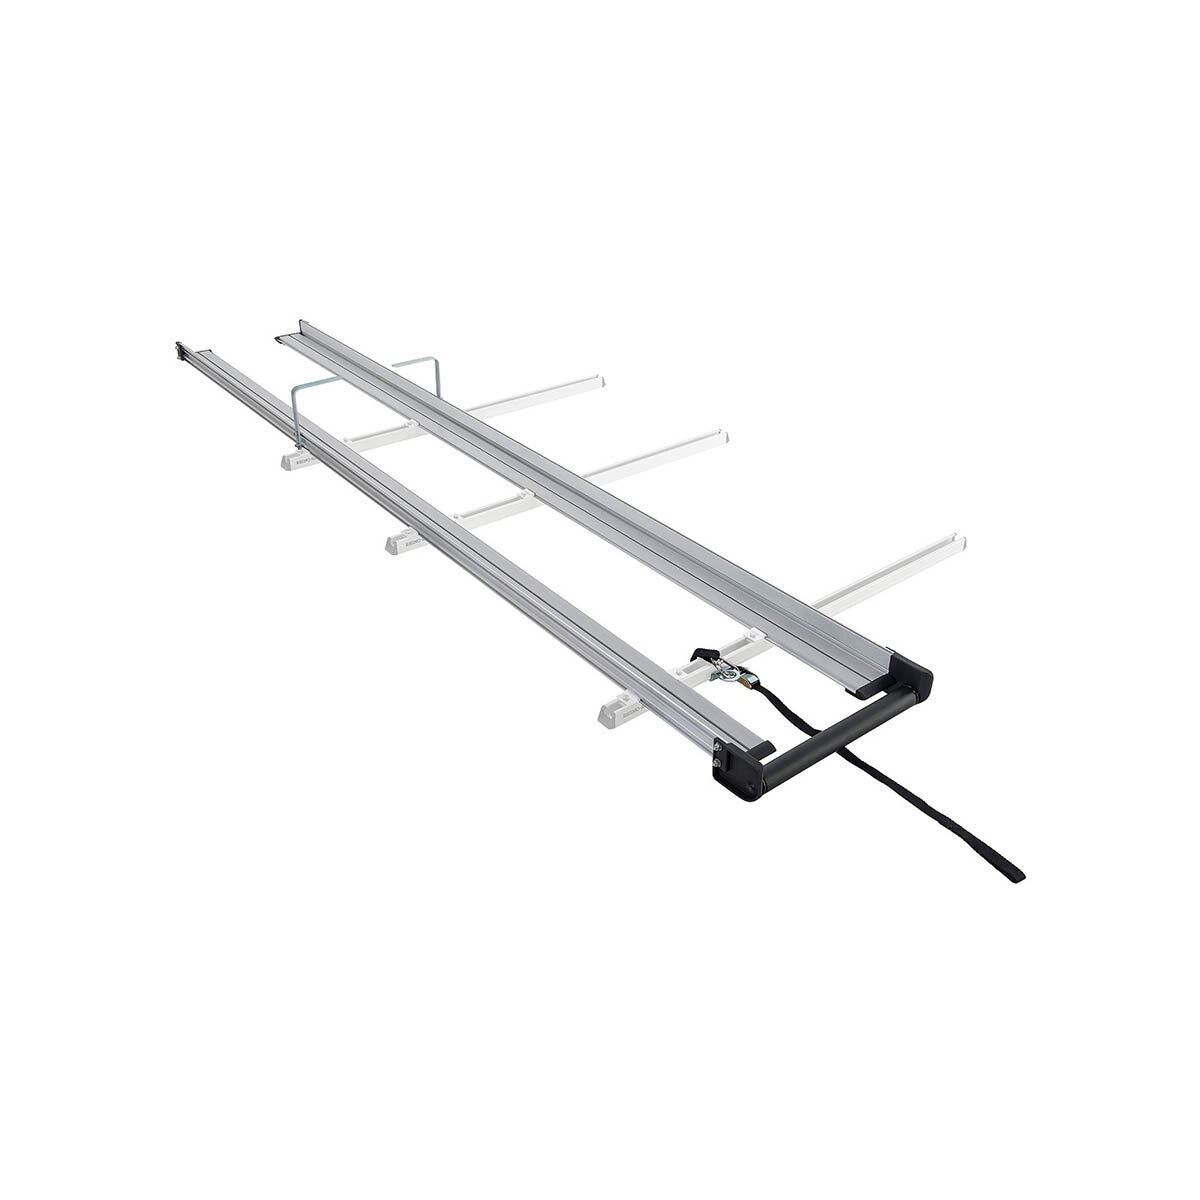 Rhino-Rack 3.0M Csl Ladder Rack System With 680mm Roller Outback Equipment